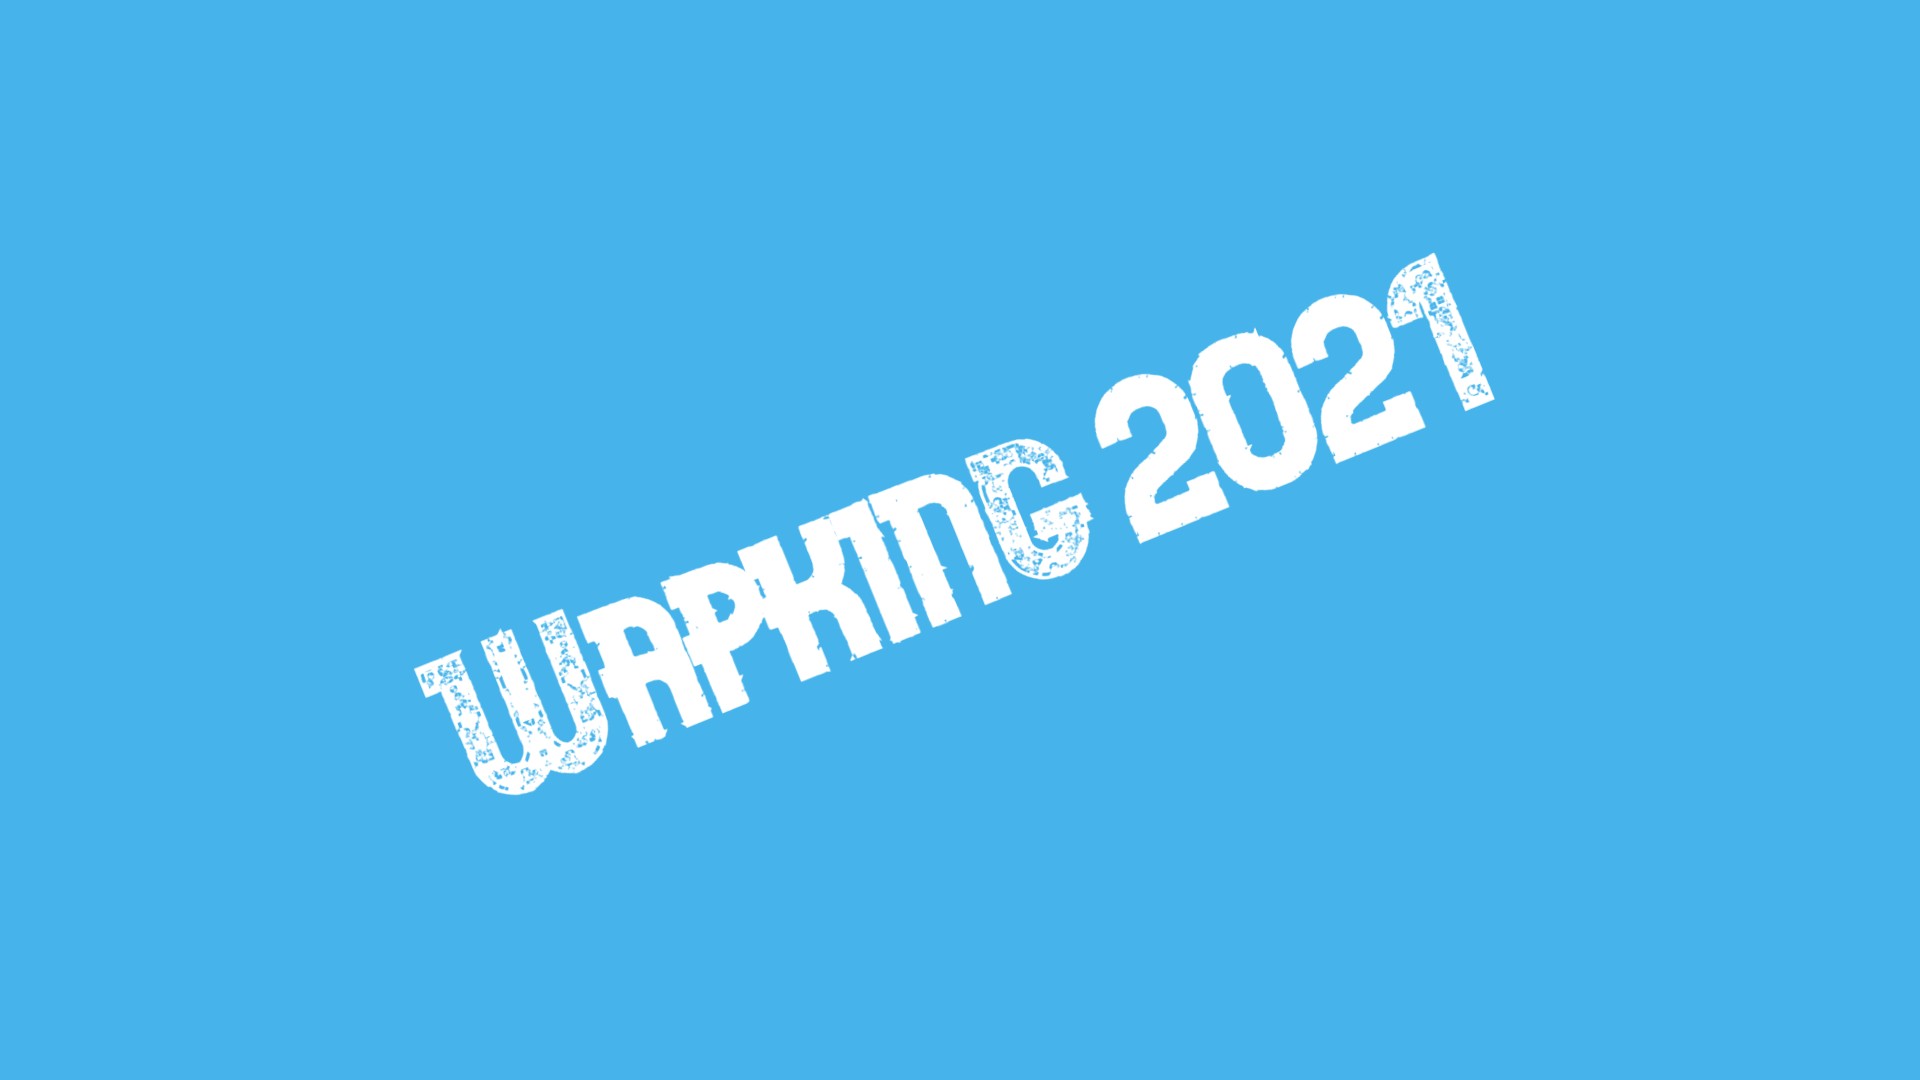 'WAPKING 2021' written with white font, where W and 1 are blurred, on light blue background